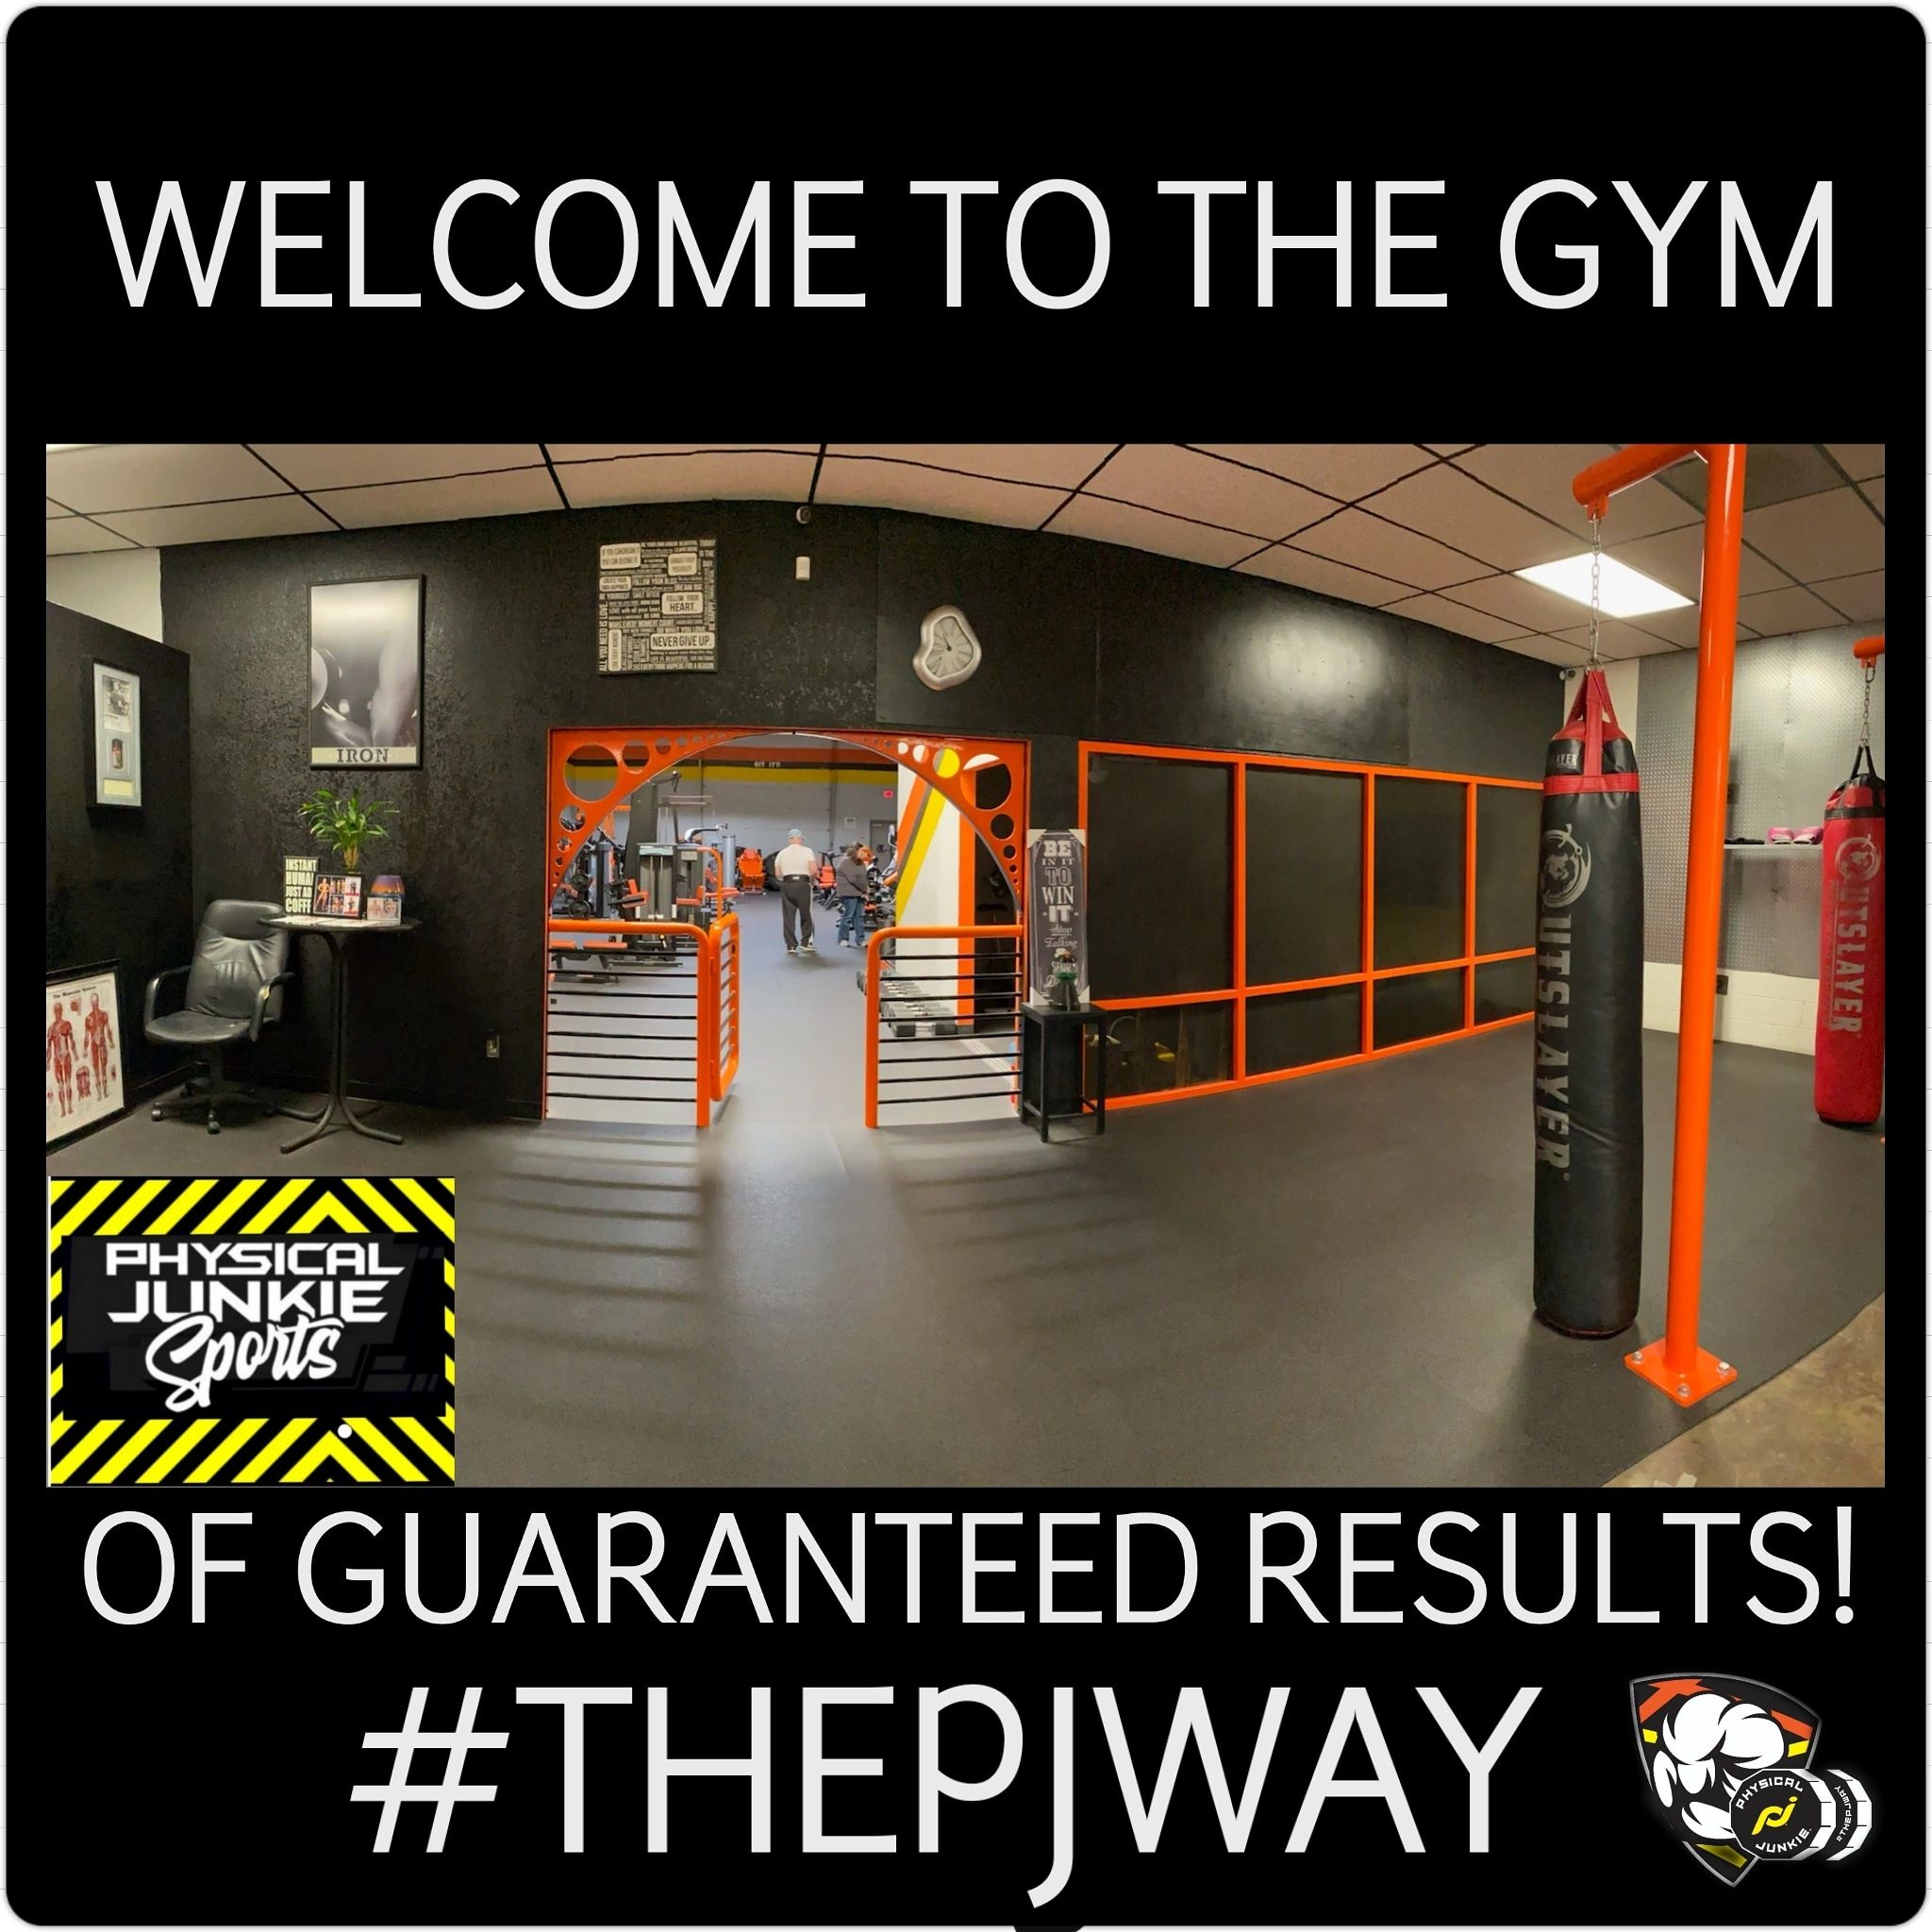 Our PRIVATE JYM supplies its user a program of GUARANTEED RESULTS! Entry requires you to use a meal 